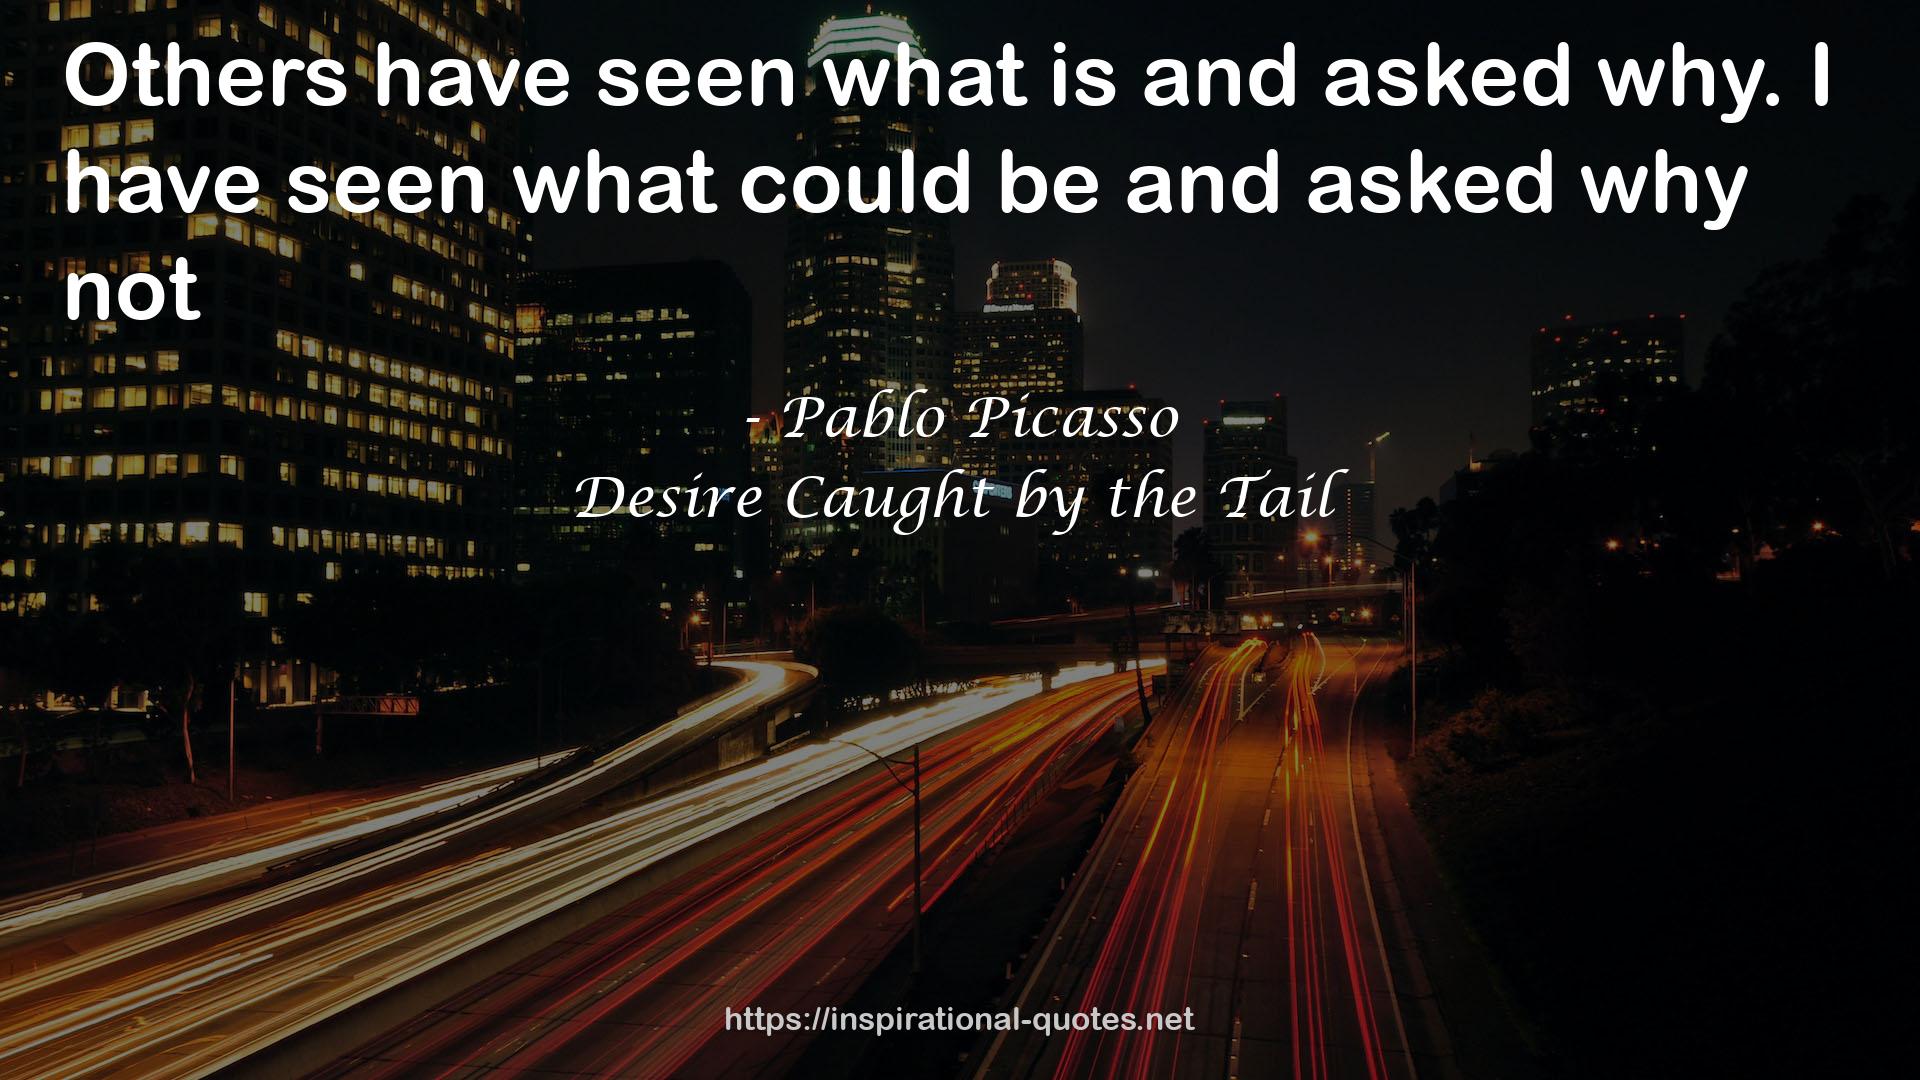 Desire Caught by the Tail QUOTES